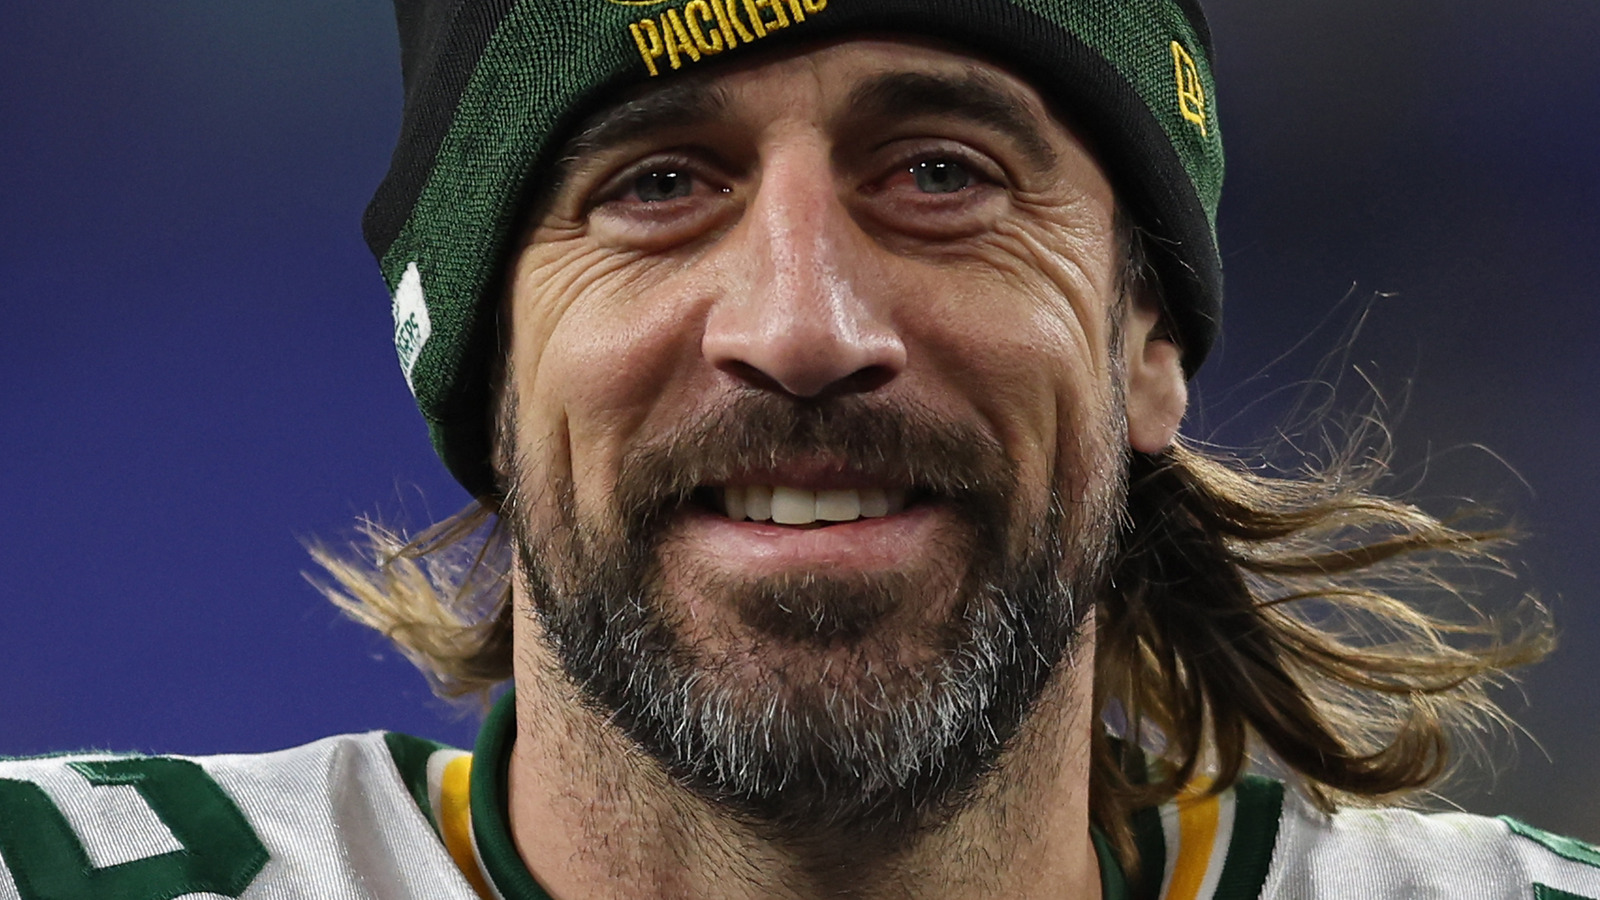 Aaron Rodgers’ New Training Camp Look Has Everyone Saying The Same Thing